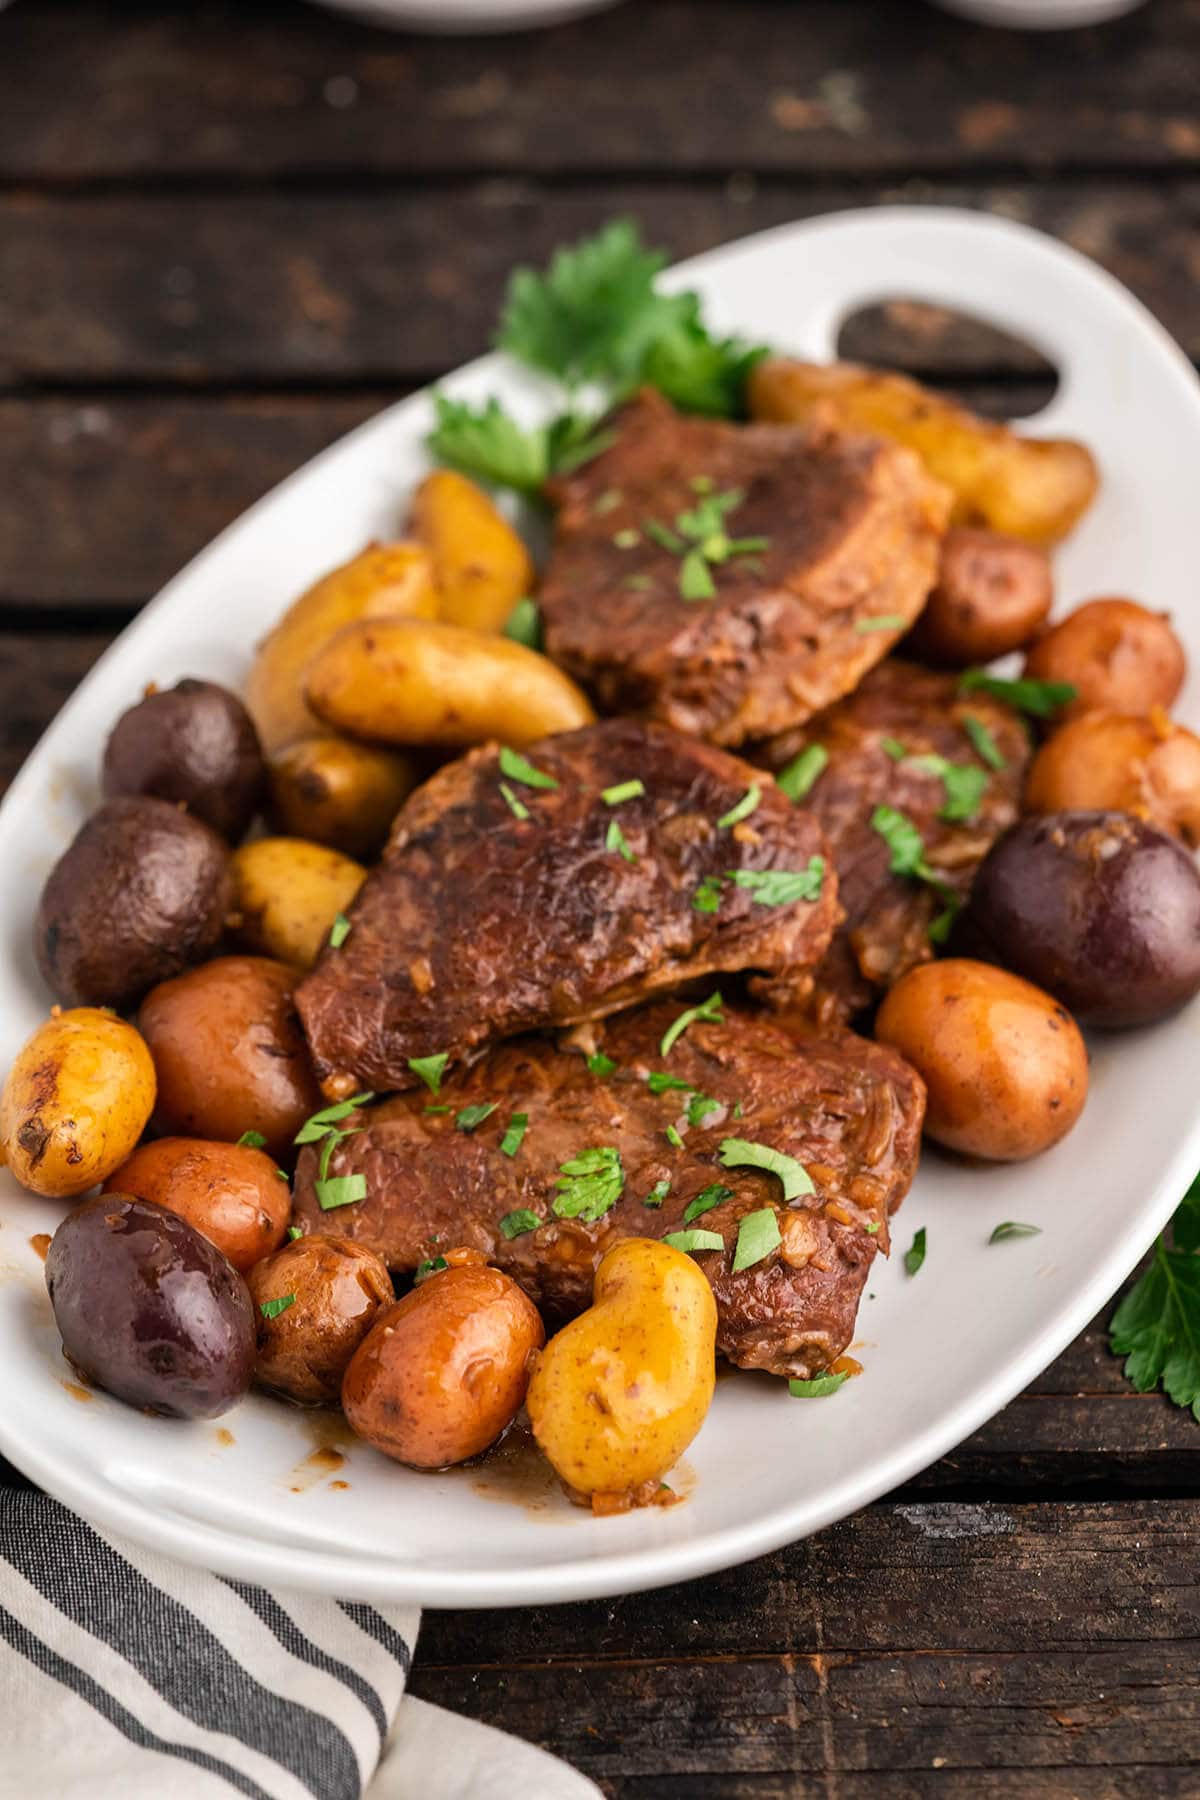 Beef and potatoes on platter with fingerling potatoes.